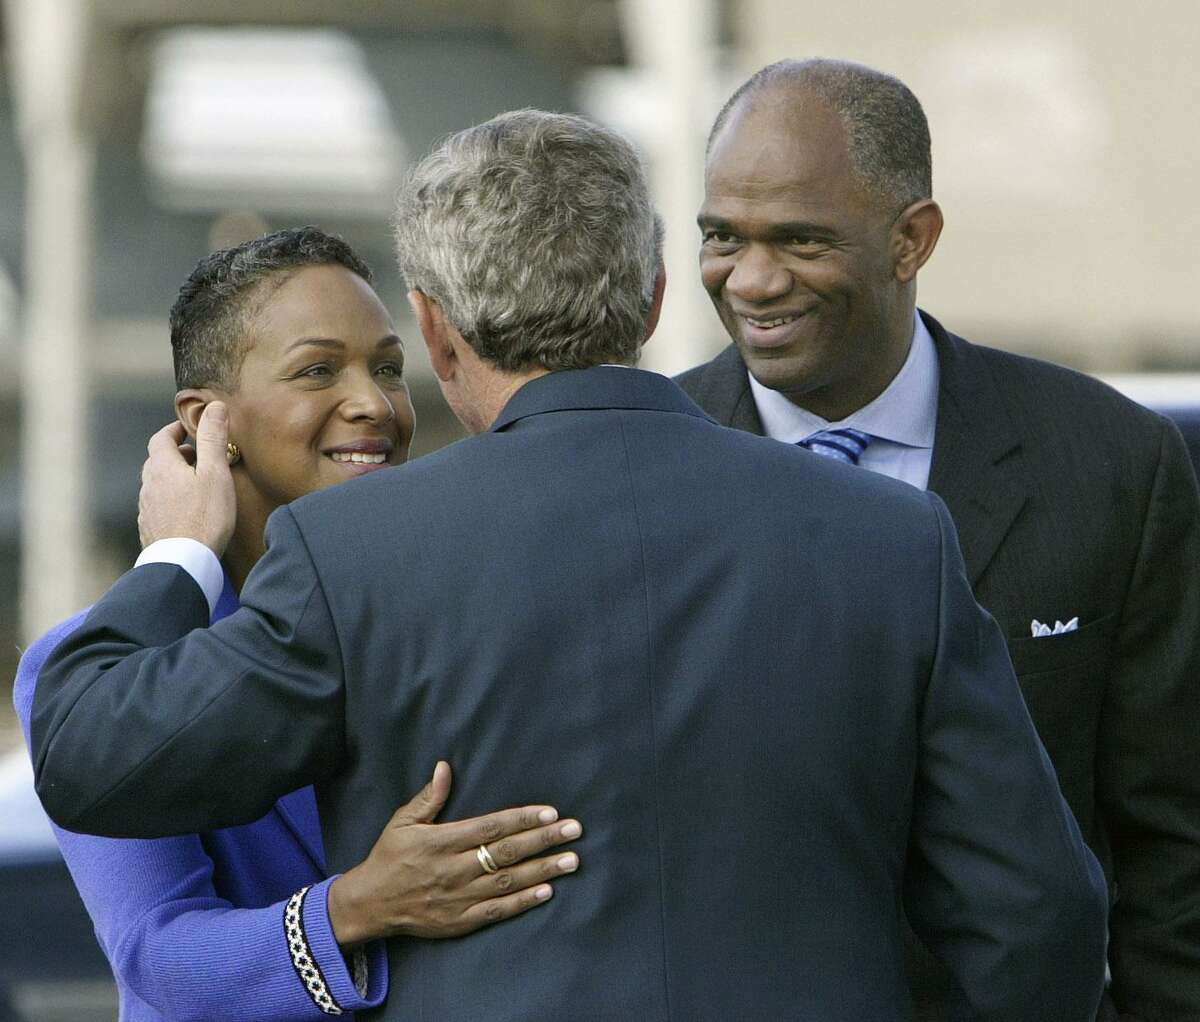 President Bush is welcomed to Houston after landing at Ellington Field by Pastor Kirbyjon Caldwell, right, and his wife Suzette at left, Friday, Sept. 12, 2003. President Bush will promote his faith-based initiative as he lends support to The Power Center, a huge multi-use complex celebrating ten years of community service in southwest Houston, run by Caldwell and business owners. (AP Photo/J. Scott Applewhite)